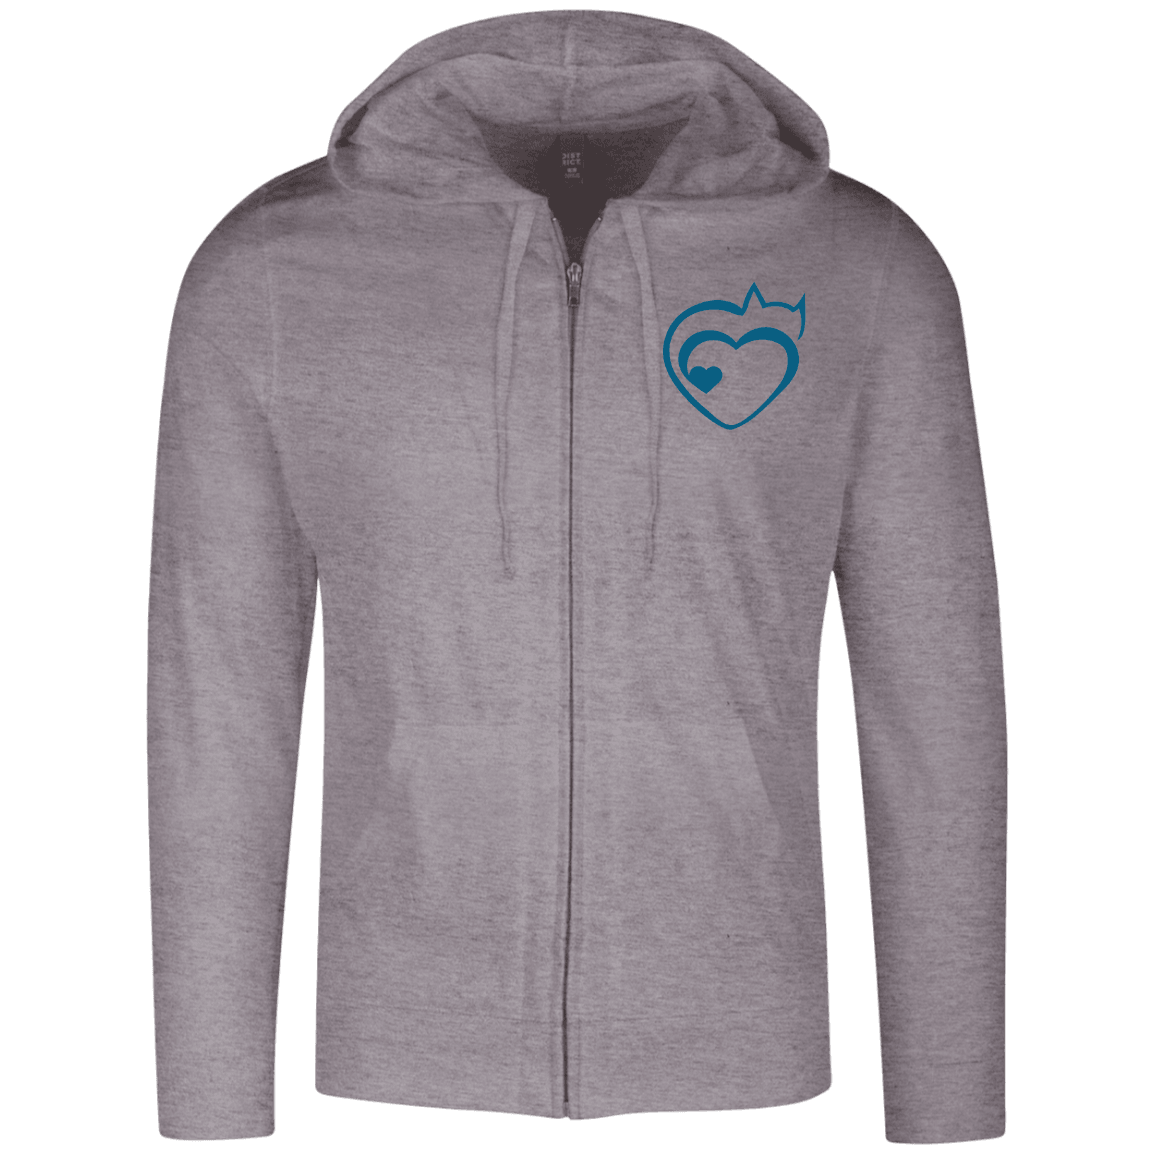 Designs by MyUtopia Shout Out:Cat Heart Embrodered Light-weight Full Zip Hoodie,Dark Heather Grey / X-Small,Sweatshirts